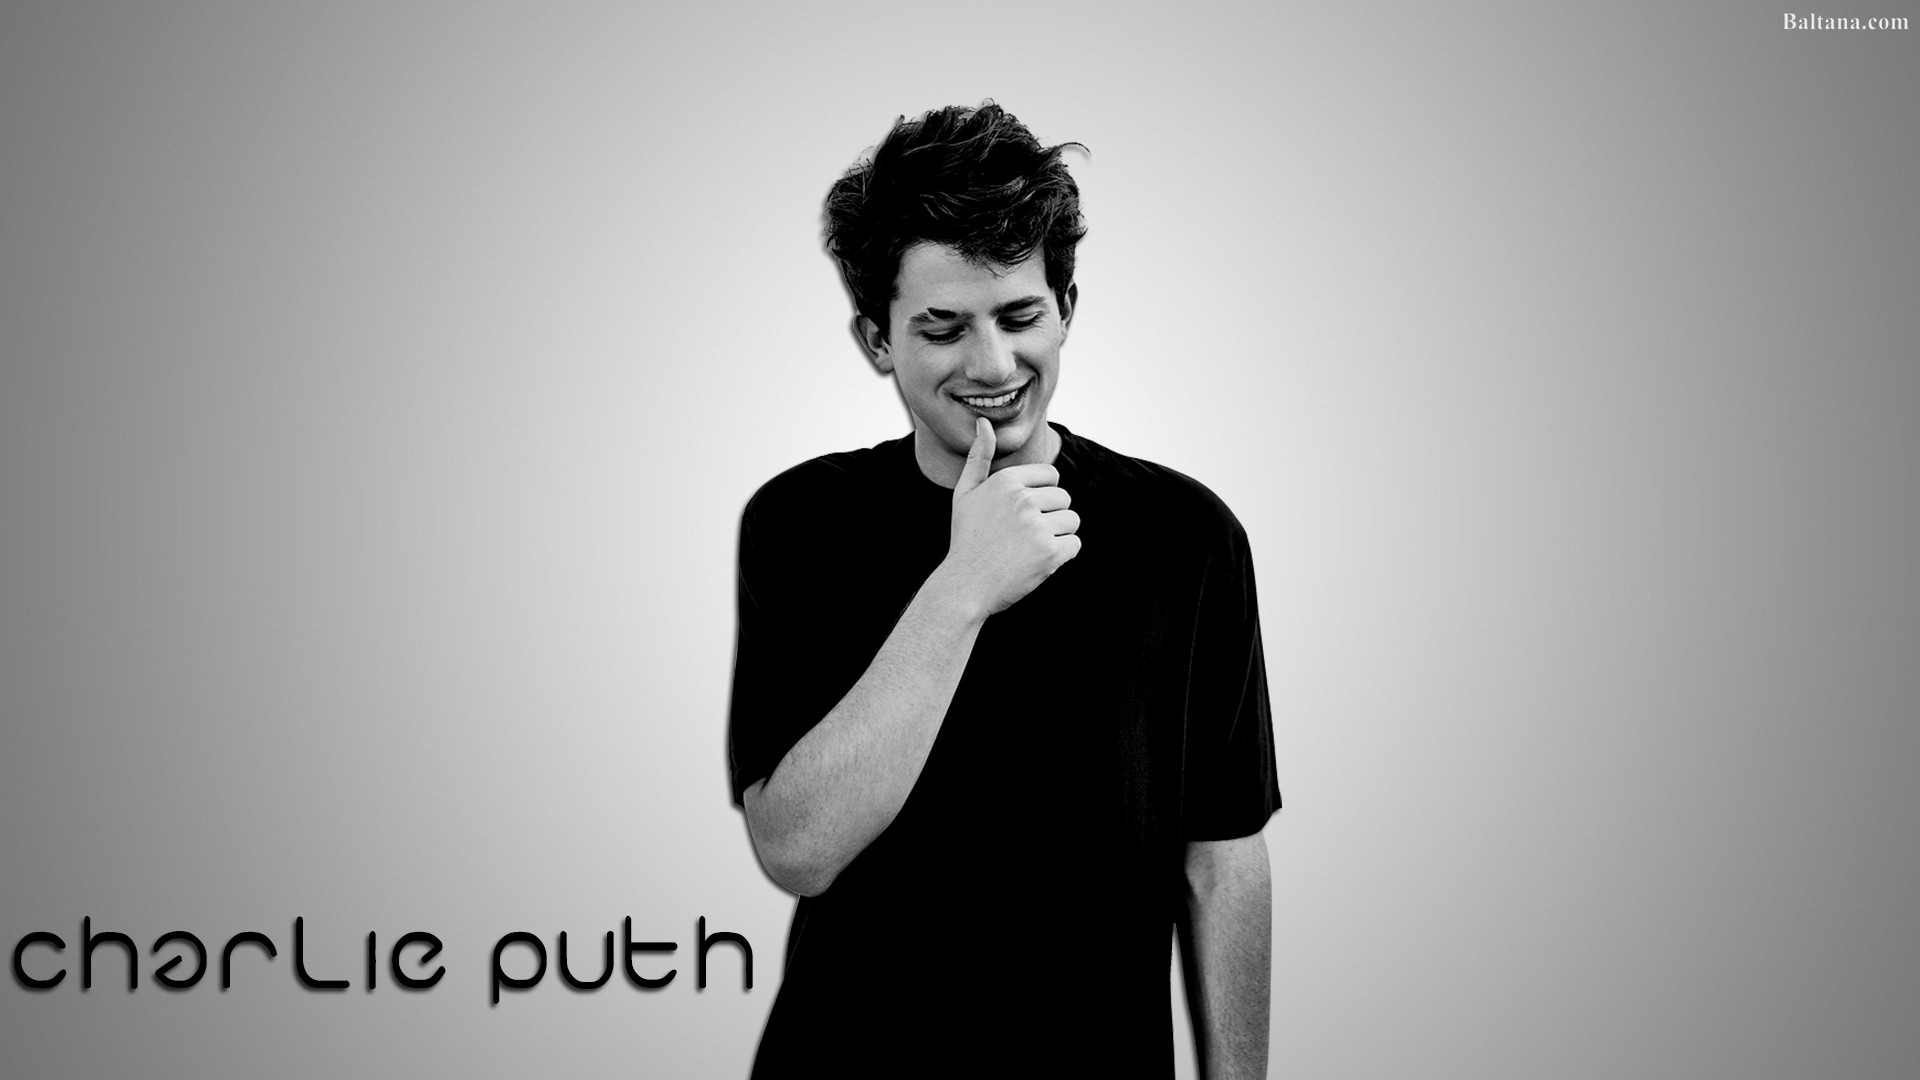 Charlie Puth Wallpaper - Voice Notes Charlie Puth - HD Wallpaper 